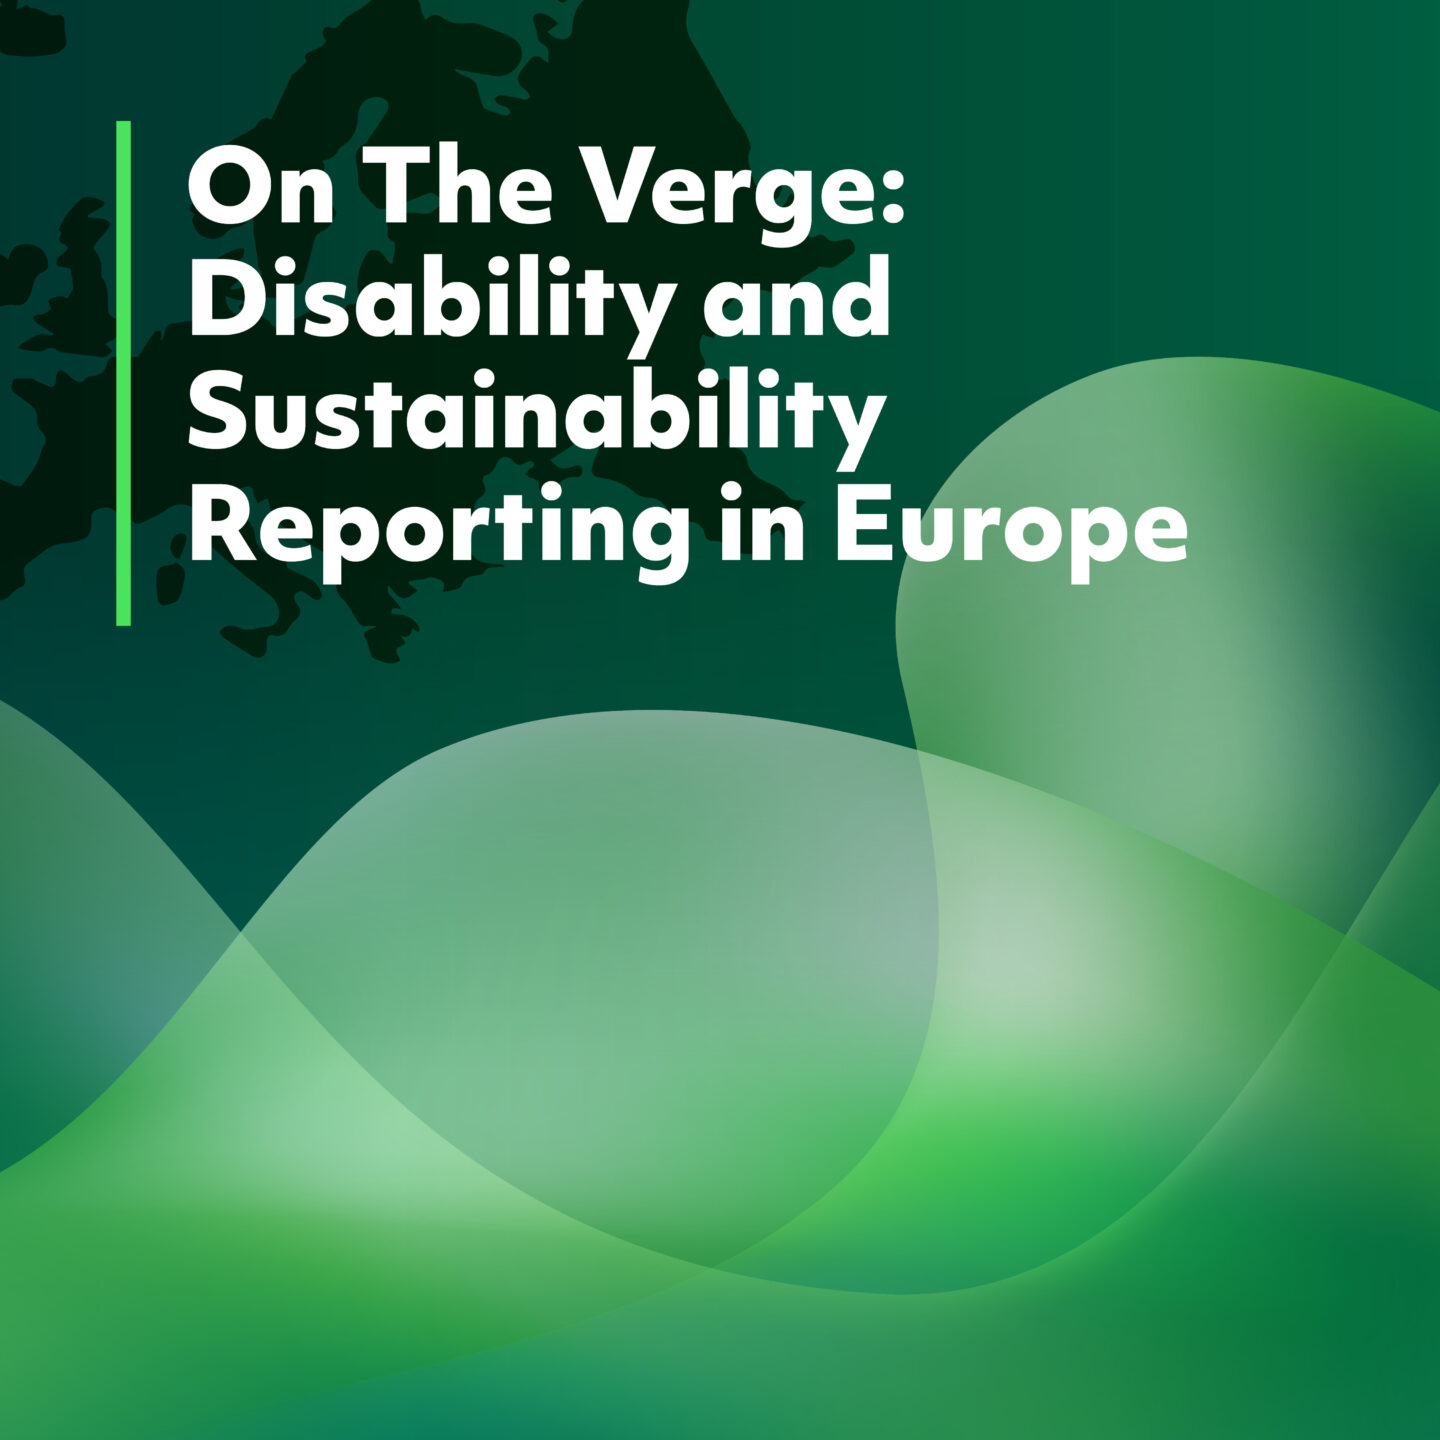 On the Verge: Disability and Sustainability Reporting in Europe. Europe silhouette with green gradient waves against a dark green background.